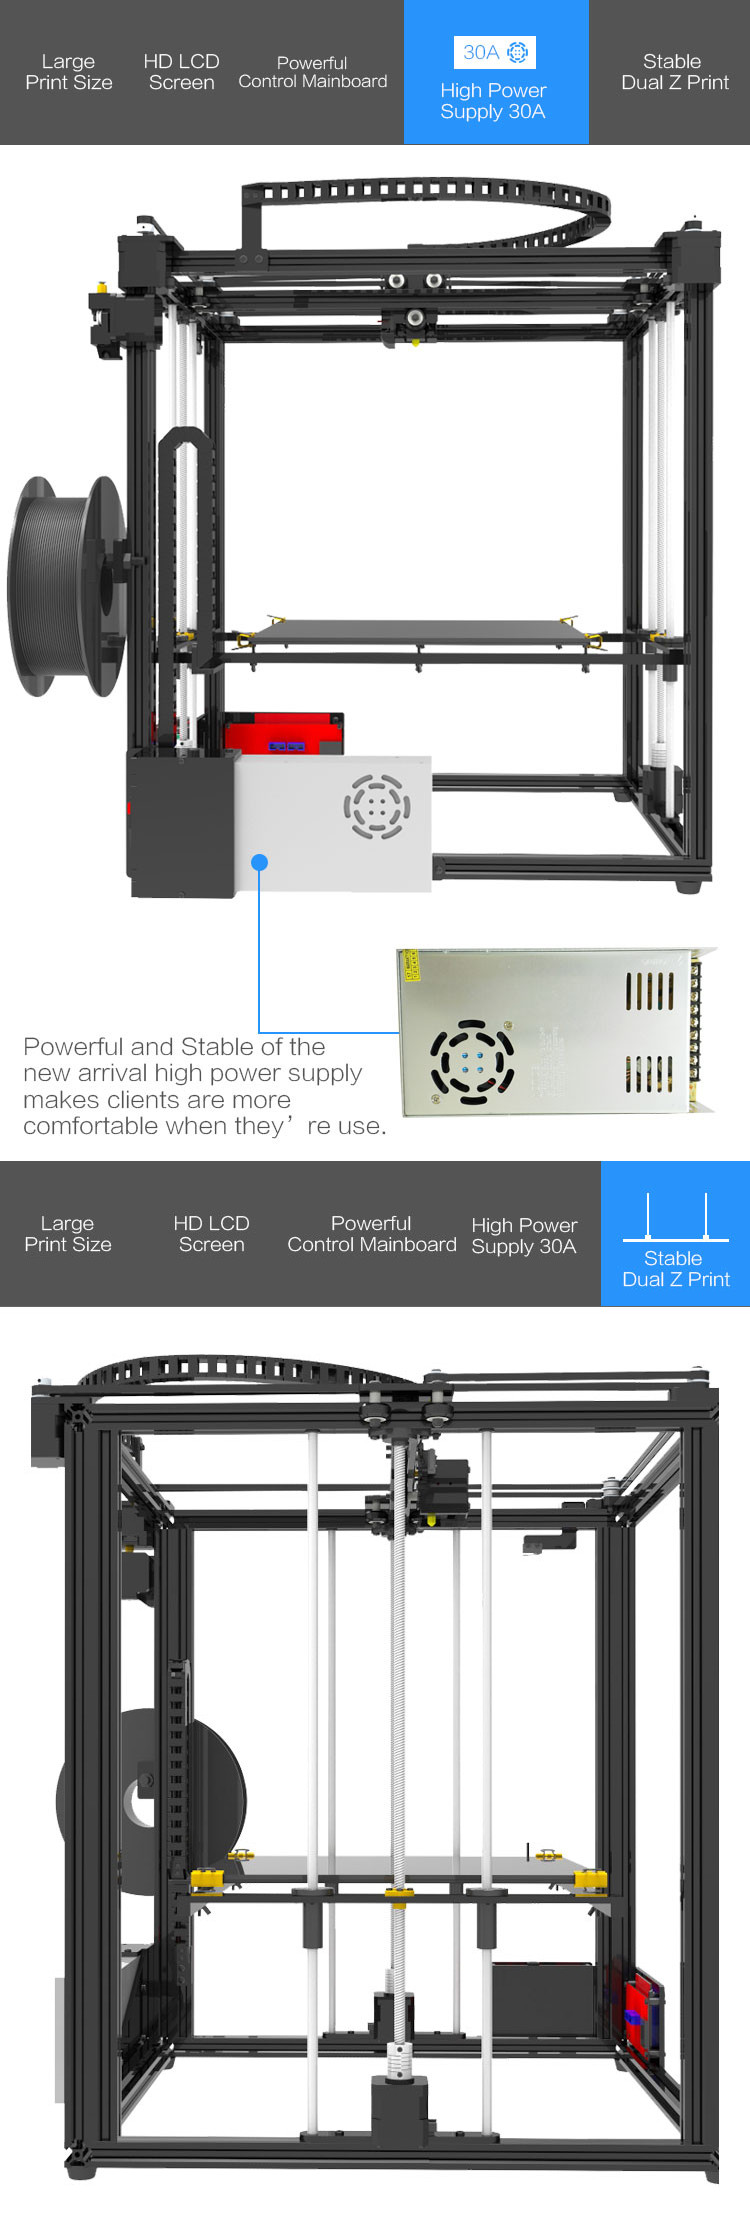 TRONXY® X5S-400 DIY Aluminum 3D Printer Kit 400*400*400mm Large Printing Size With Dual Z-axis Rod/HD LCD Screen/Double Fan 1.75mm 0.4mm Nozzle 7